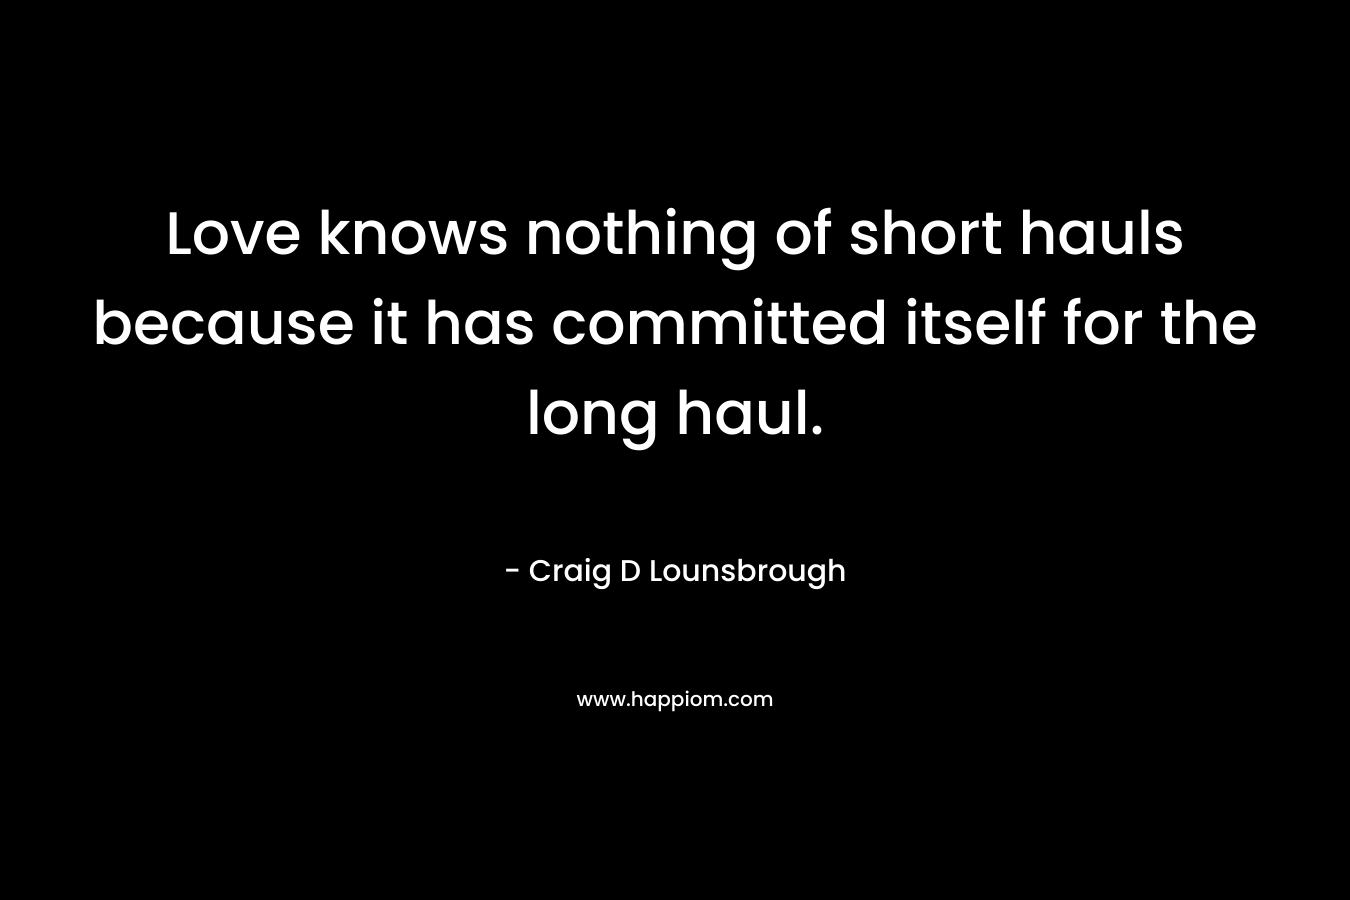 Love knows nothing of short hauls because it has committed itself for the long haul.